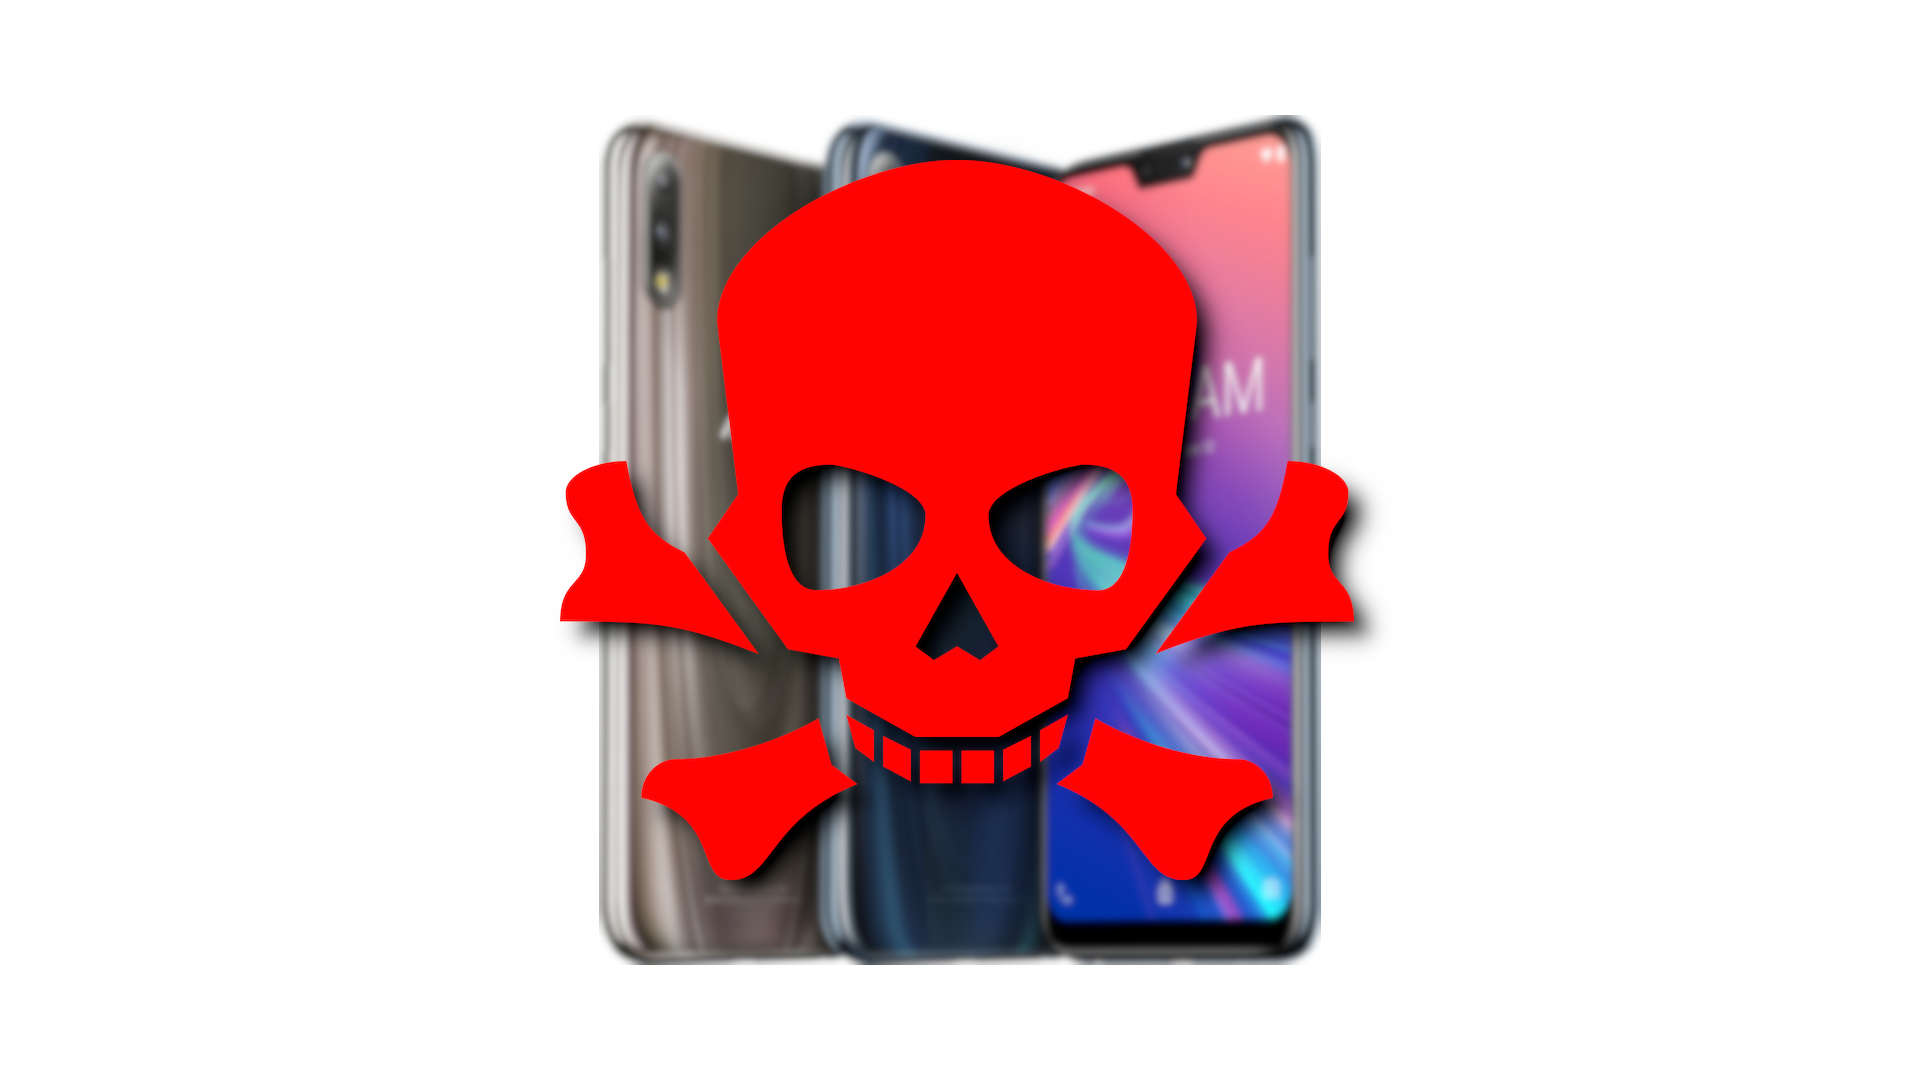 Serious problems for Asus ZenFone Max Pro M2: unit in bootloop for months